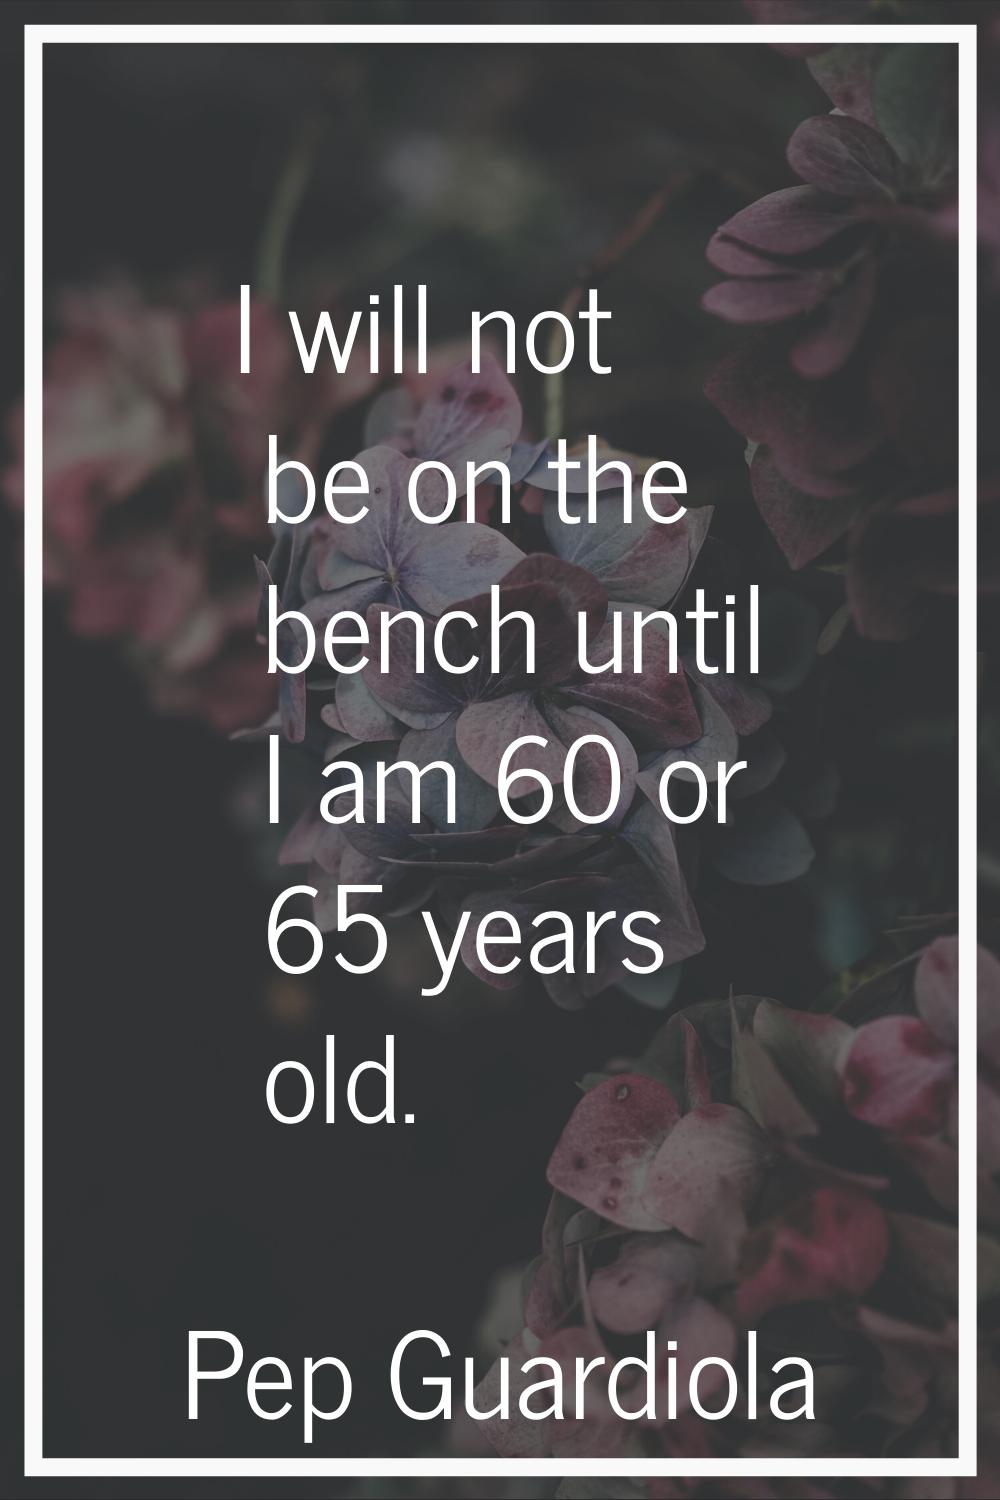 I will not be on the bench until I am 60 or 65 years old.